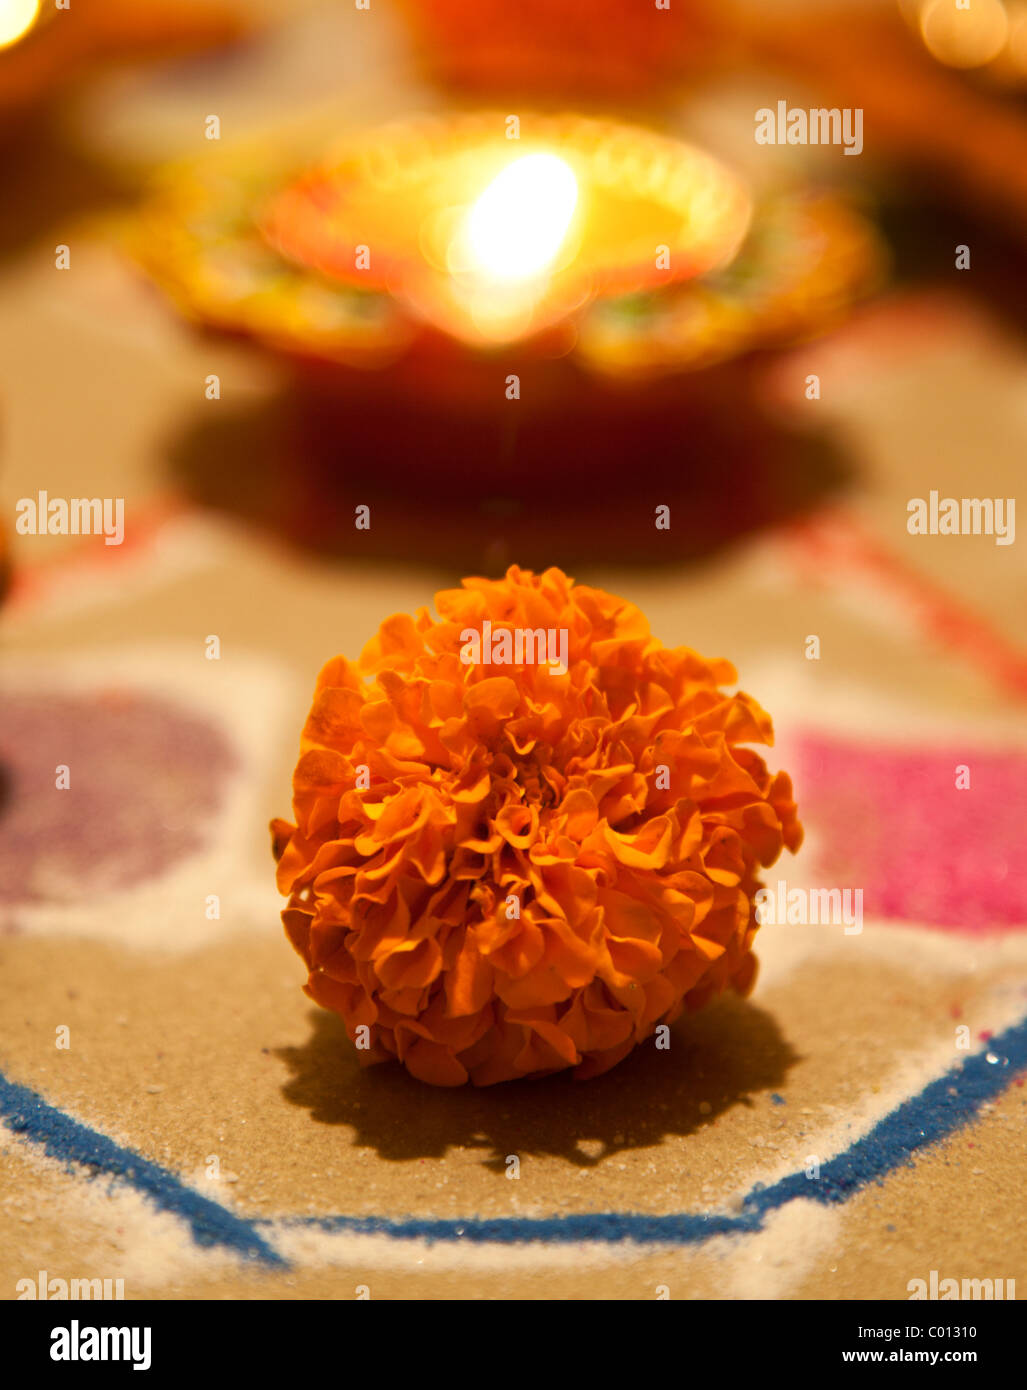 marigold with diwali light backdrop at indian festival Stock Photo